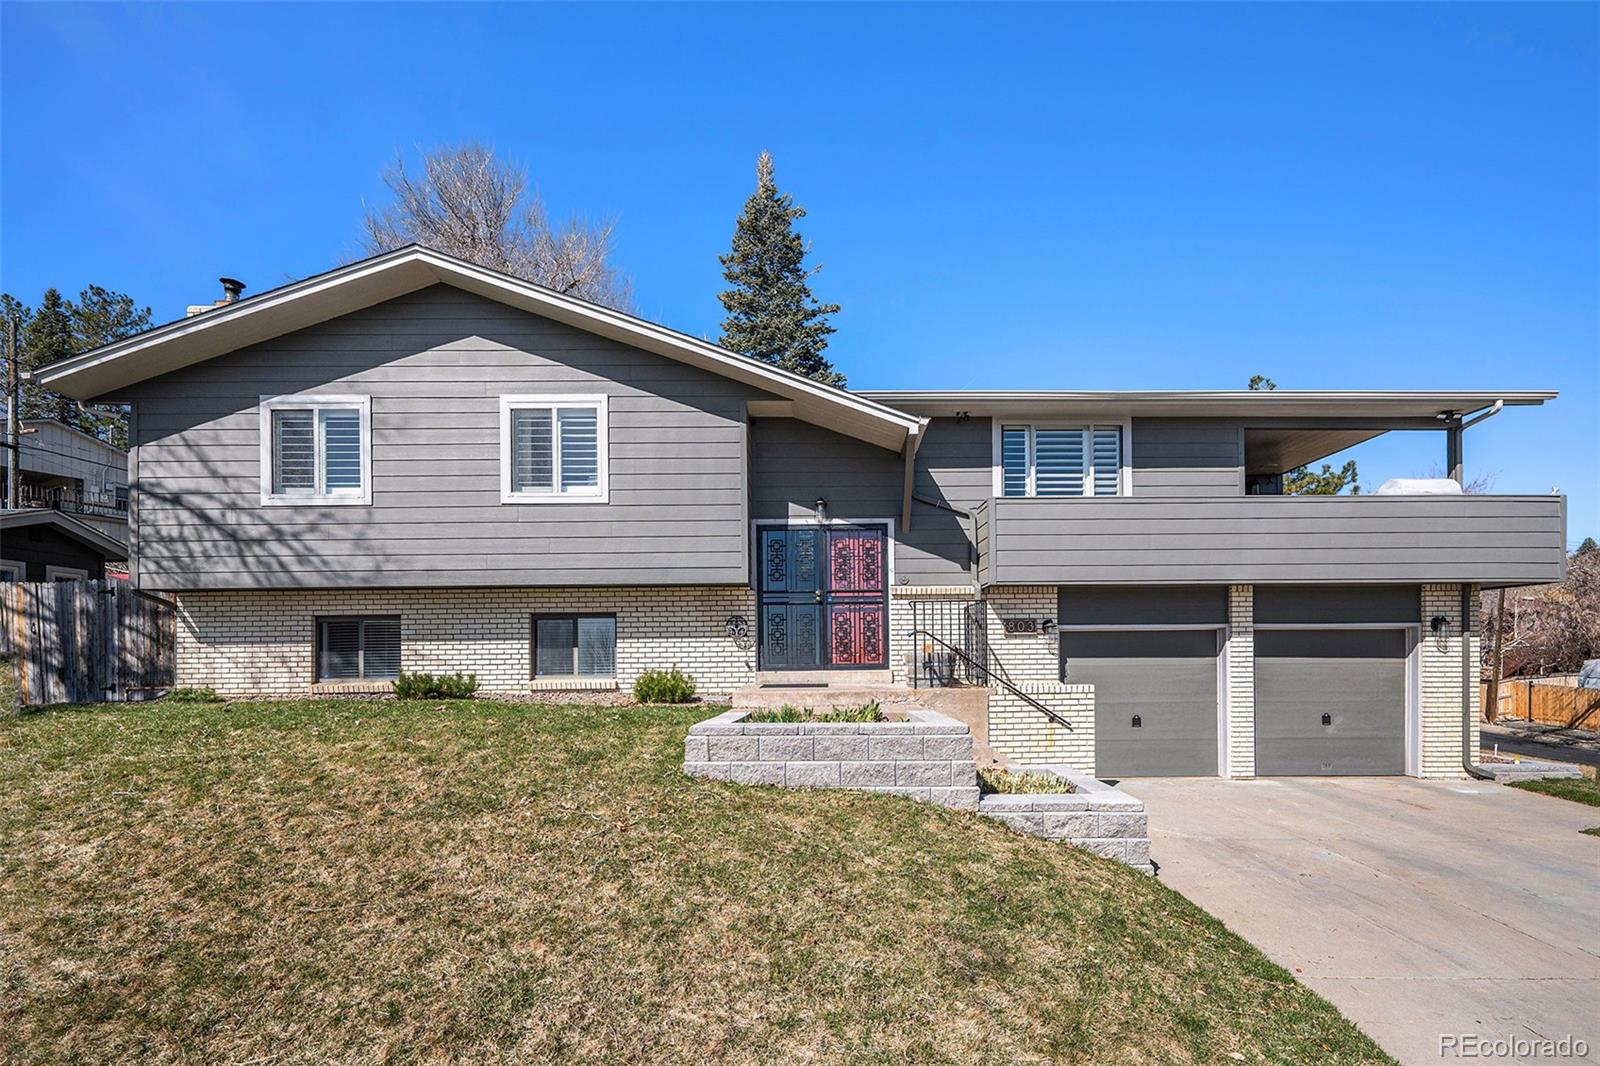 Report Image for 803 S Coors Drive,Lakewood, Colorado